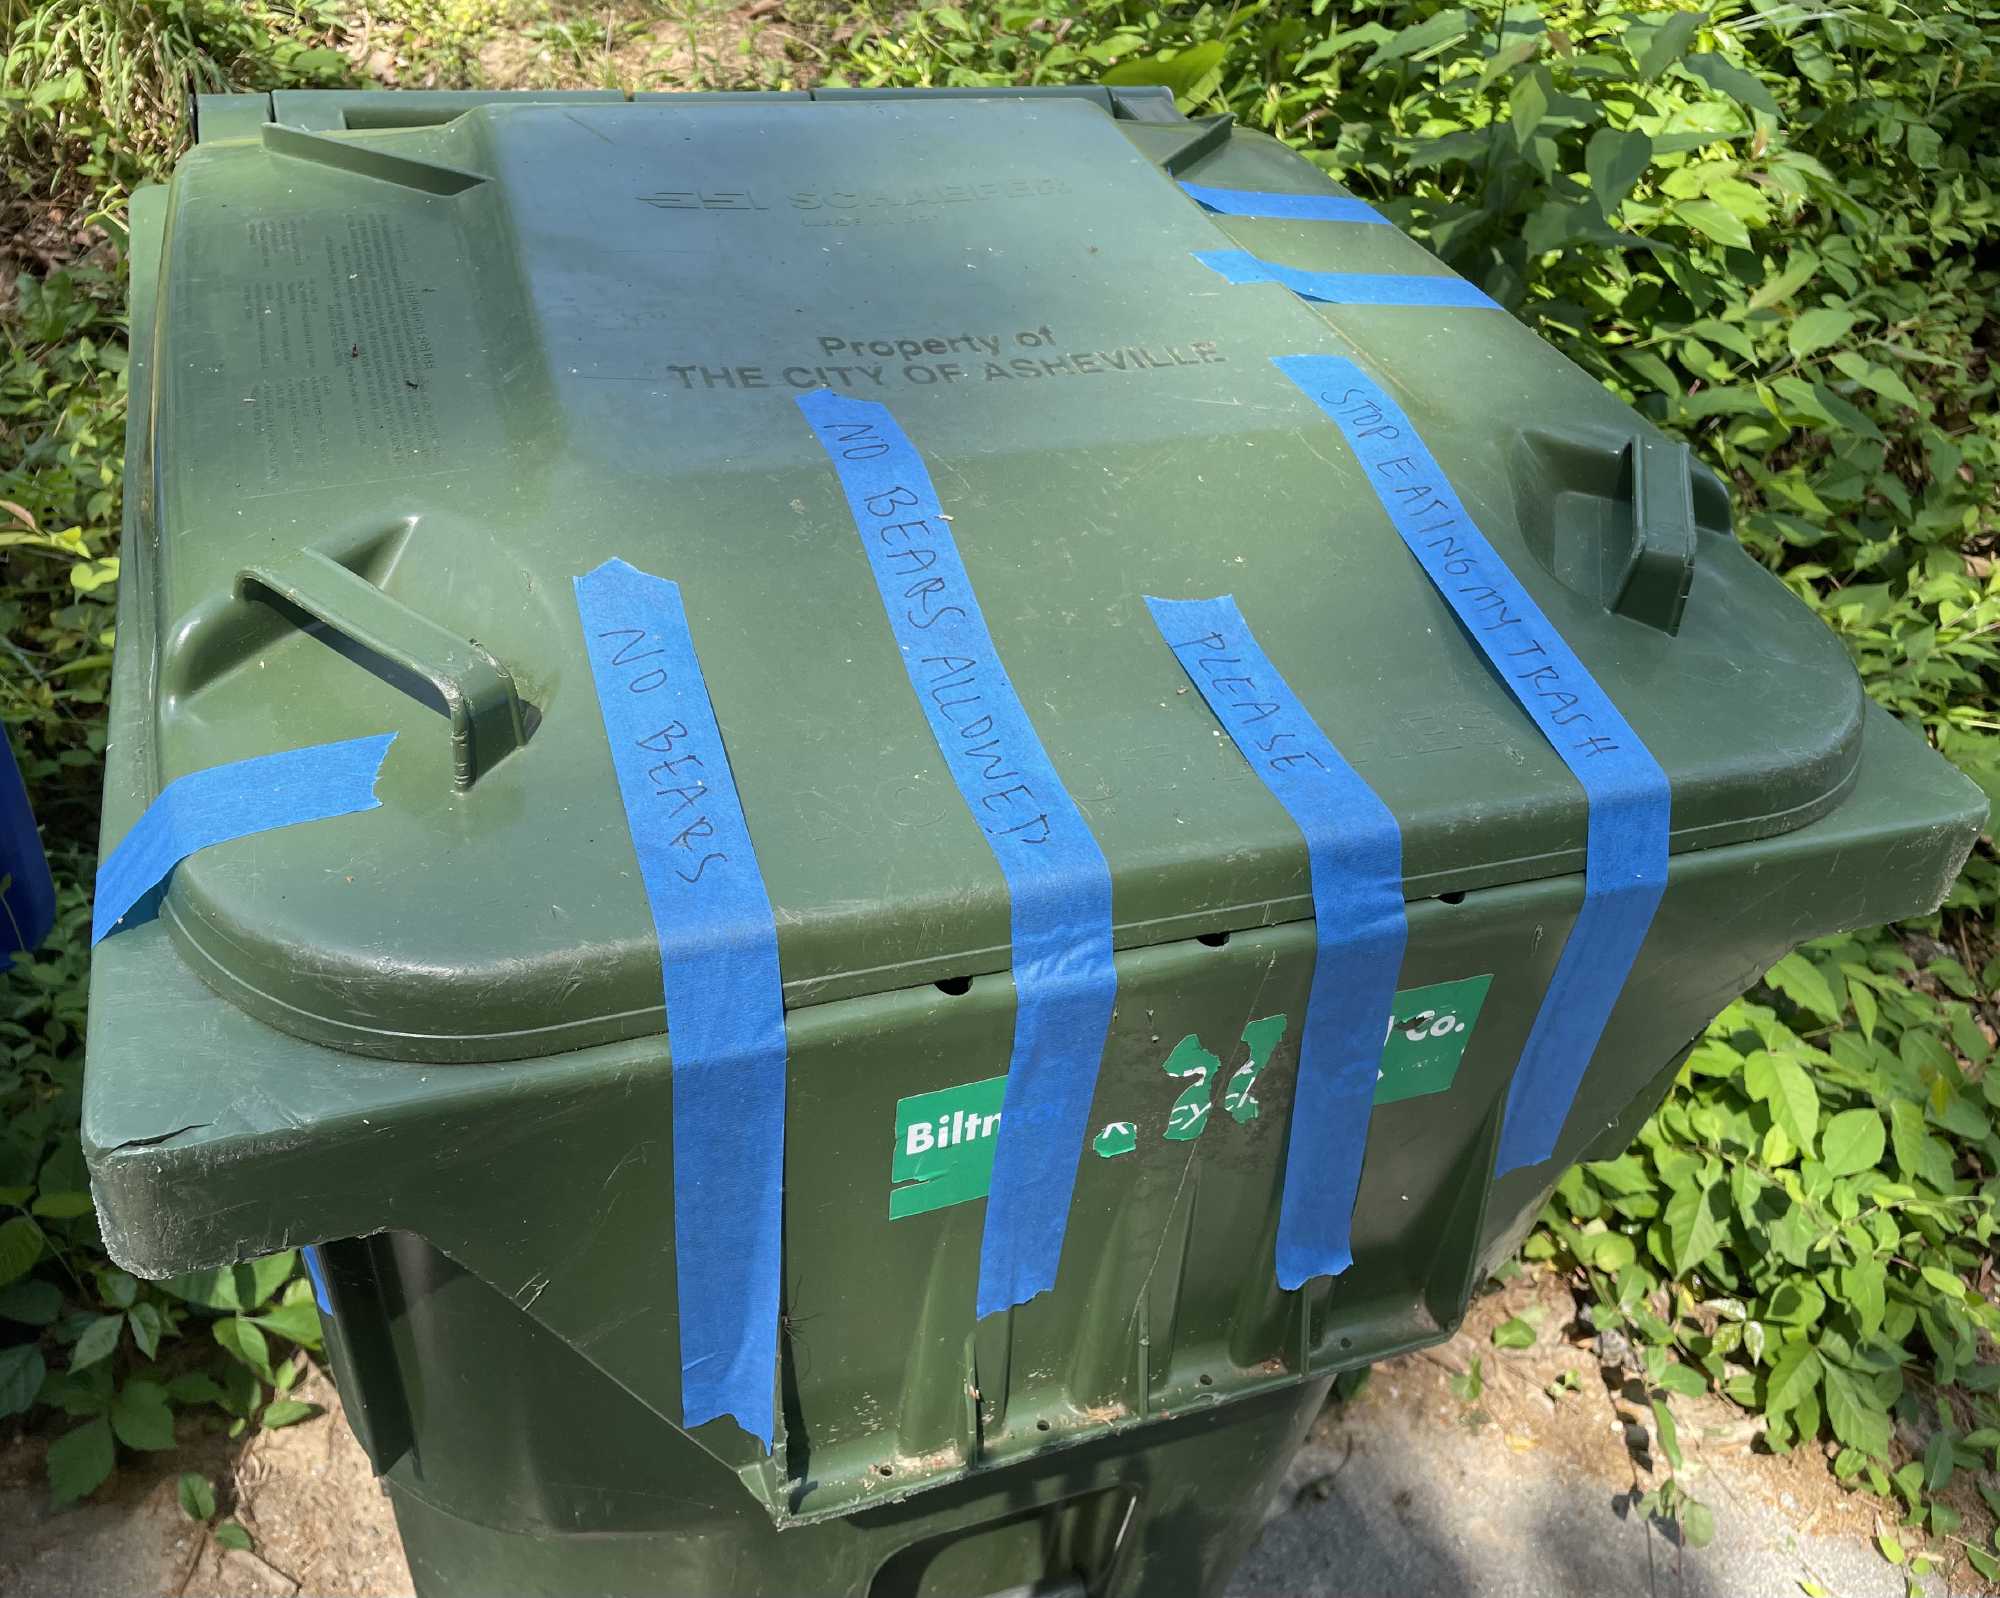 A trash can is bear proofed with painters tape